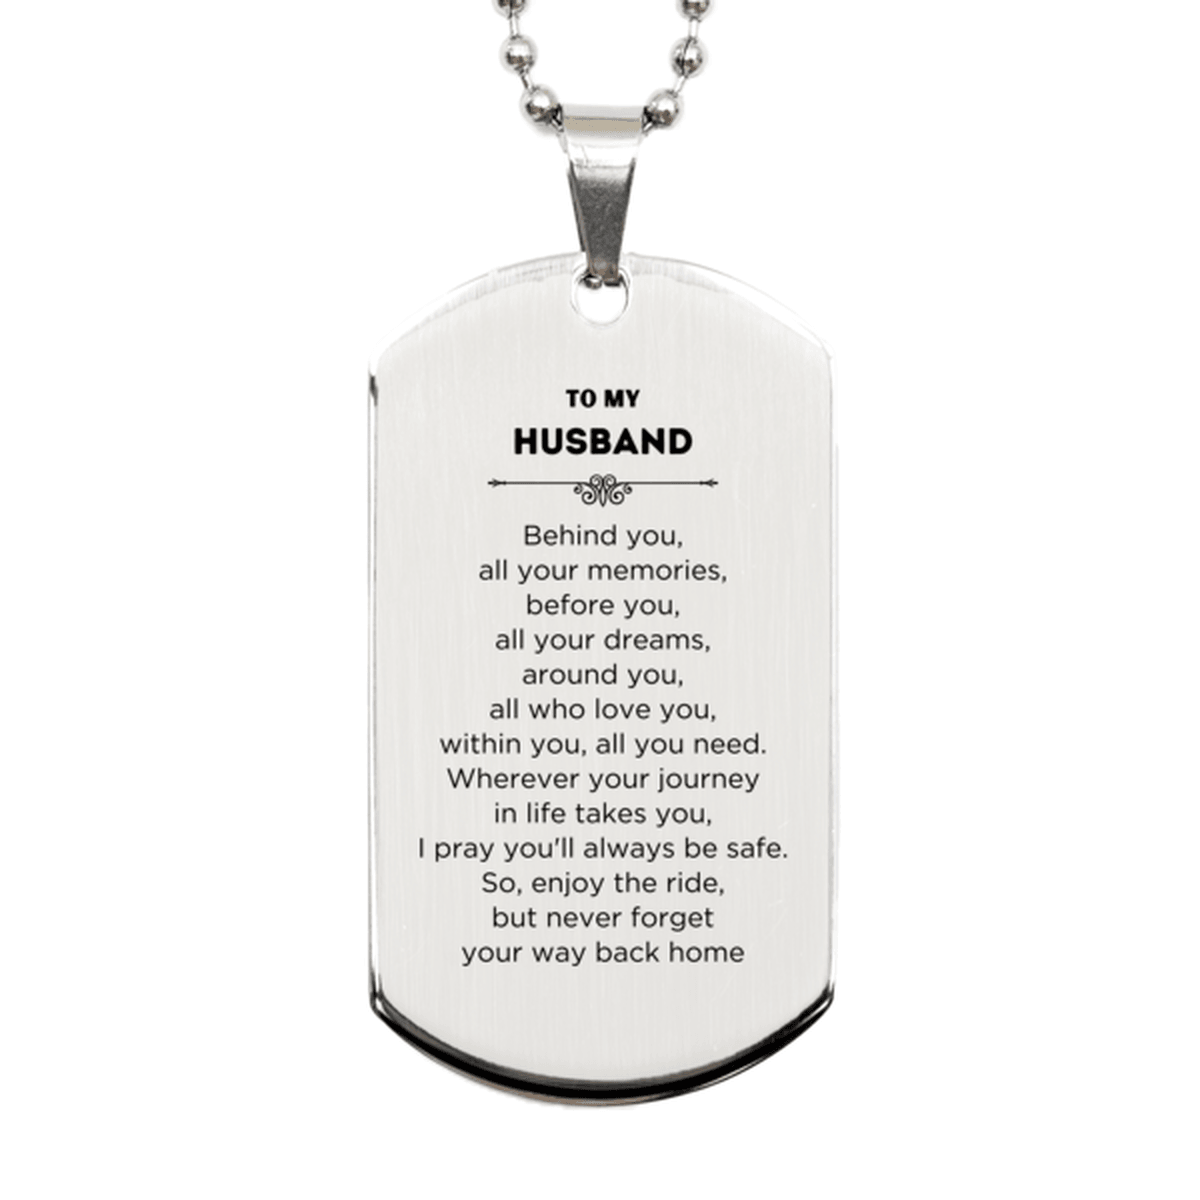 Husband Silver Dog Tag Necklace Birthday Christmas Unique Gifts Behind you, all your memories, before you, all your dreams - Mallard Moon Gift Shop